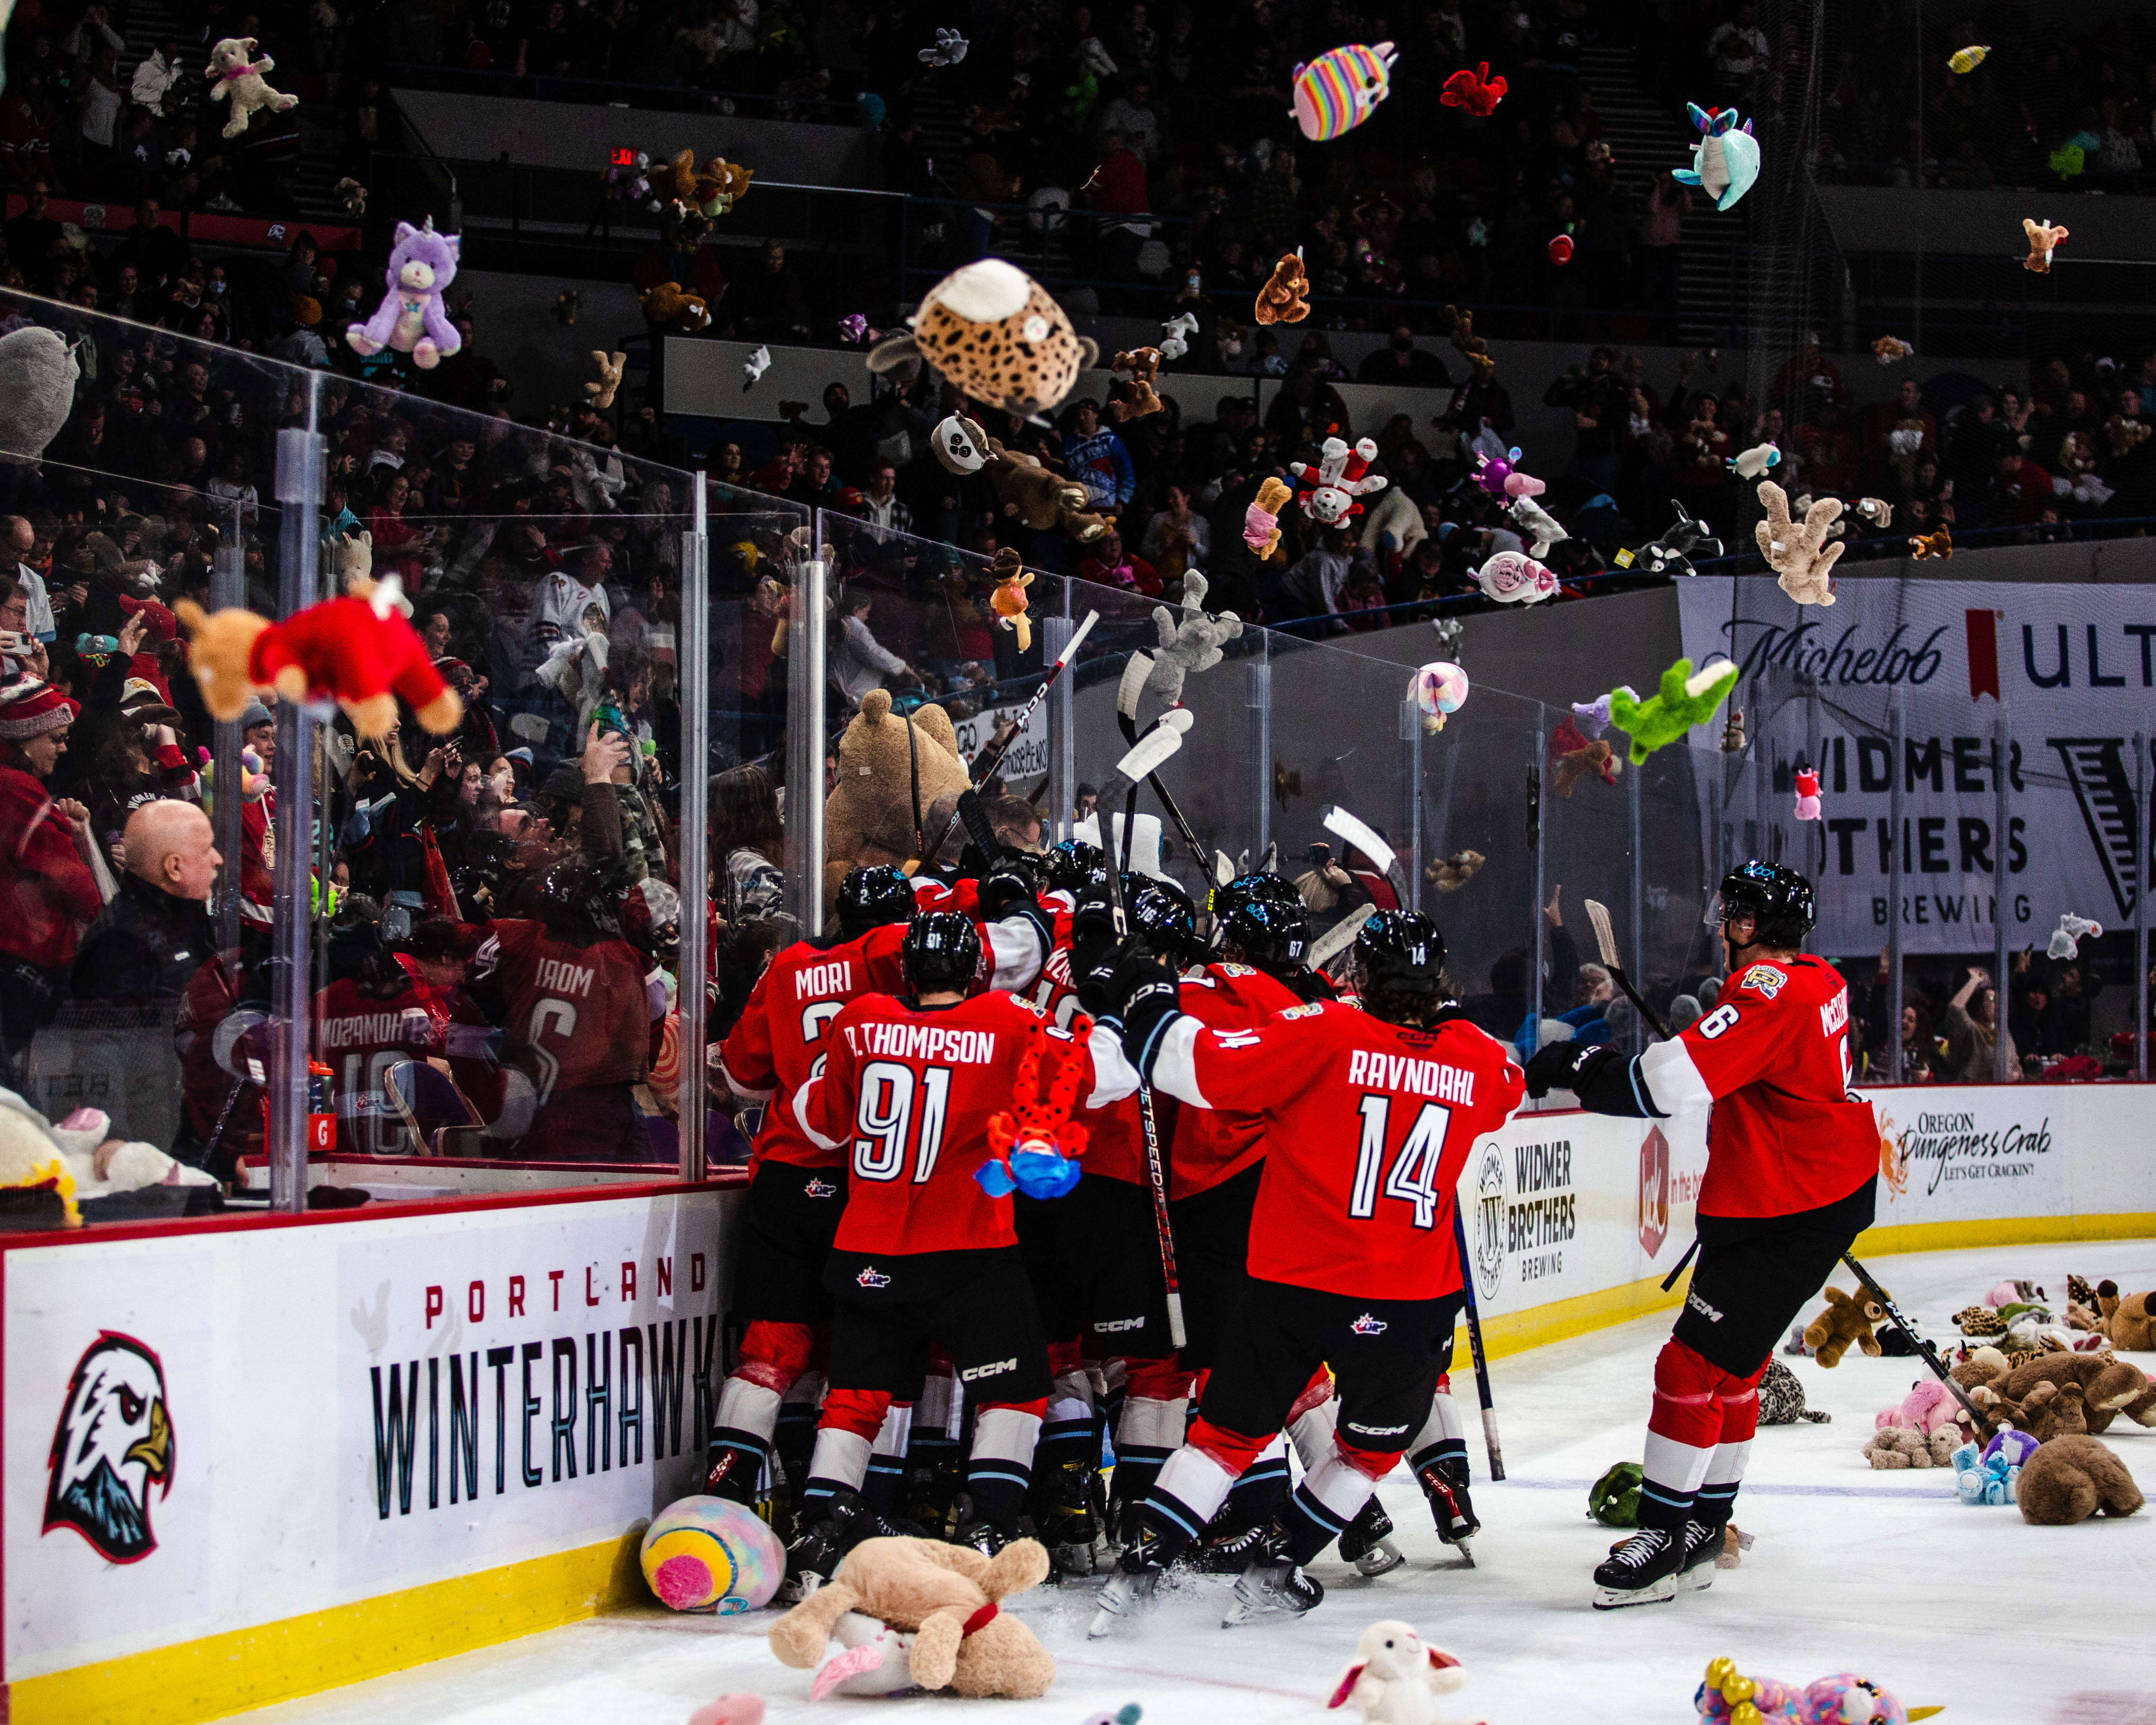 Teddy Bear Toss lets Portland Winterhawks and their fans give back - OPB